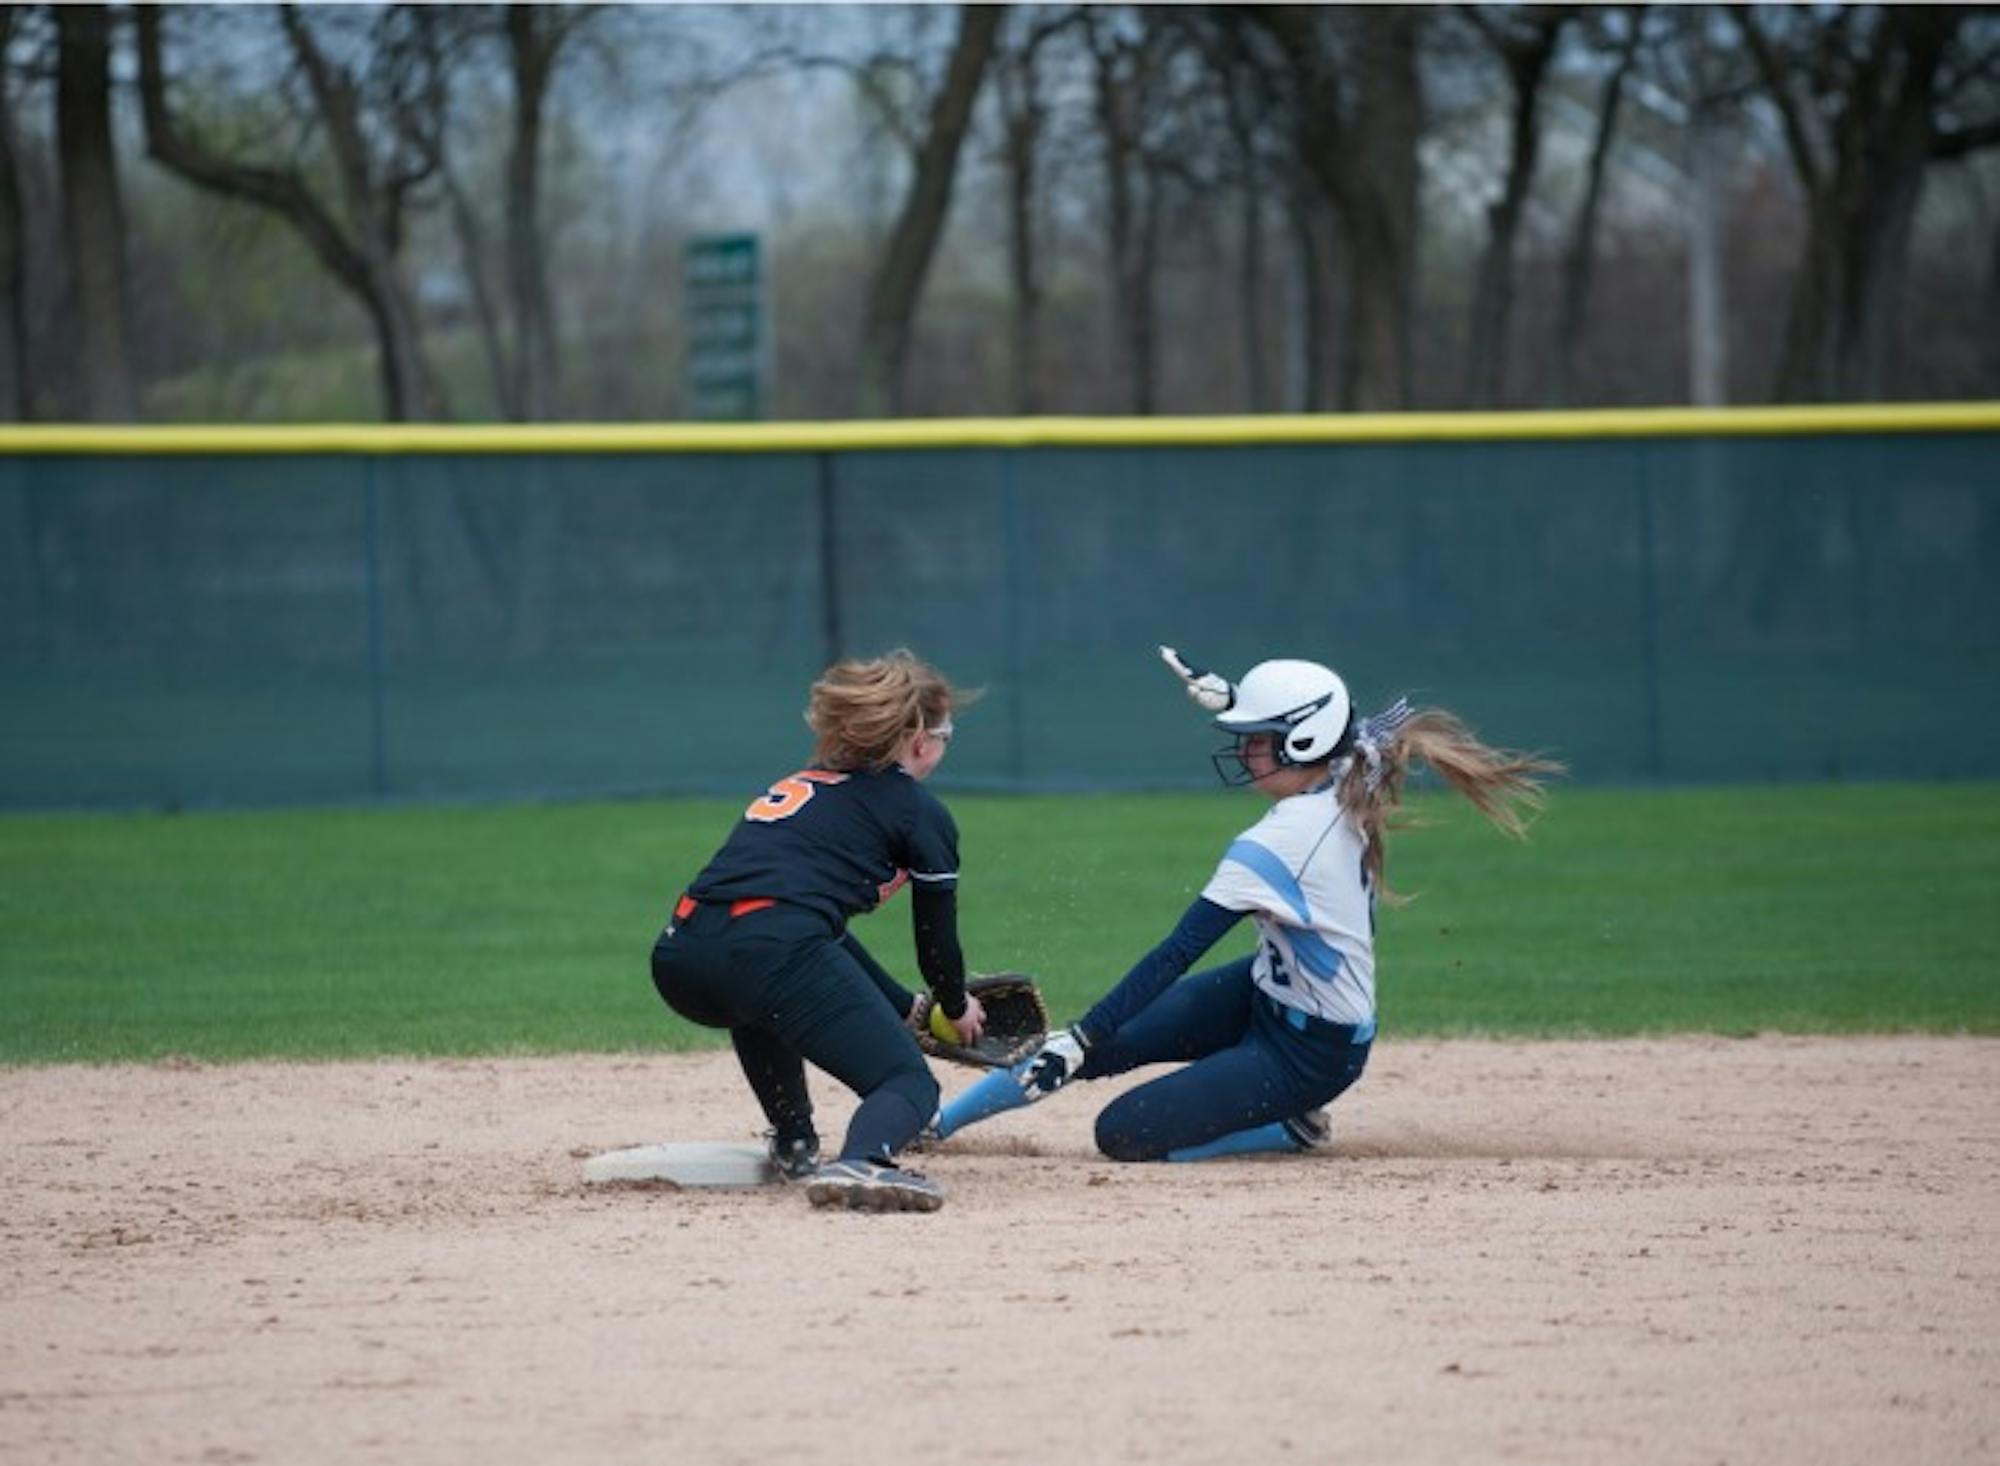 Belles freshman shortstop/second baseman Jamie Young slides into second base in Saint Mary’s 9-6 win over Kalamazoo yesterday.